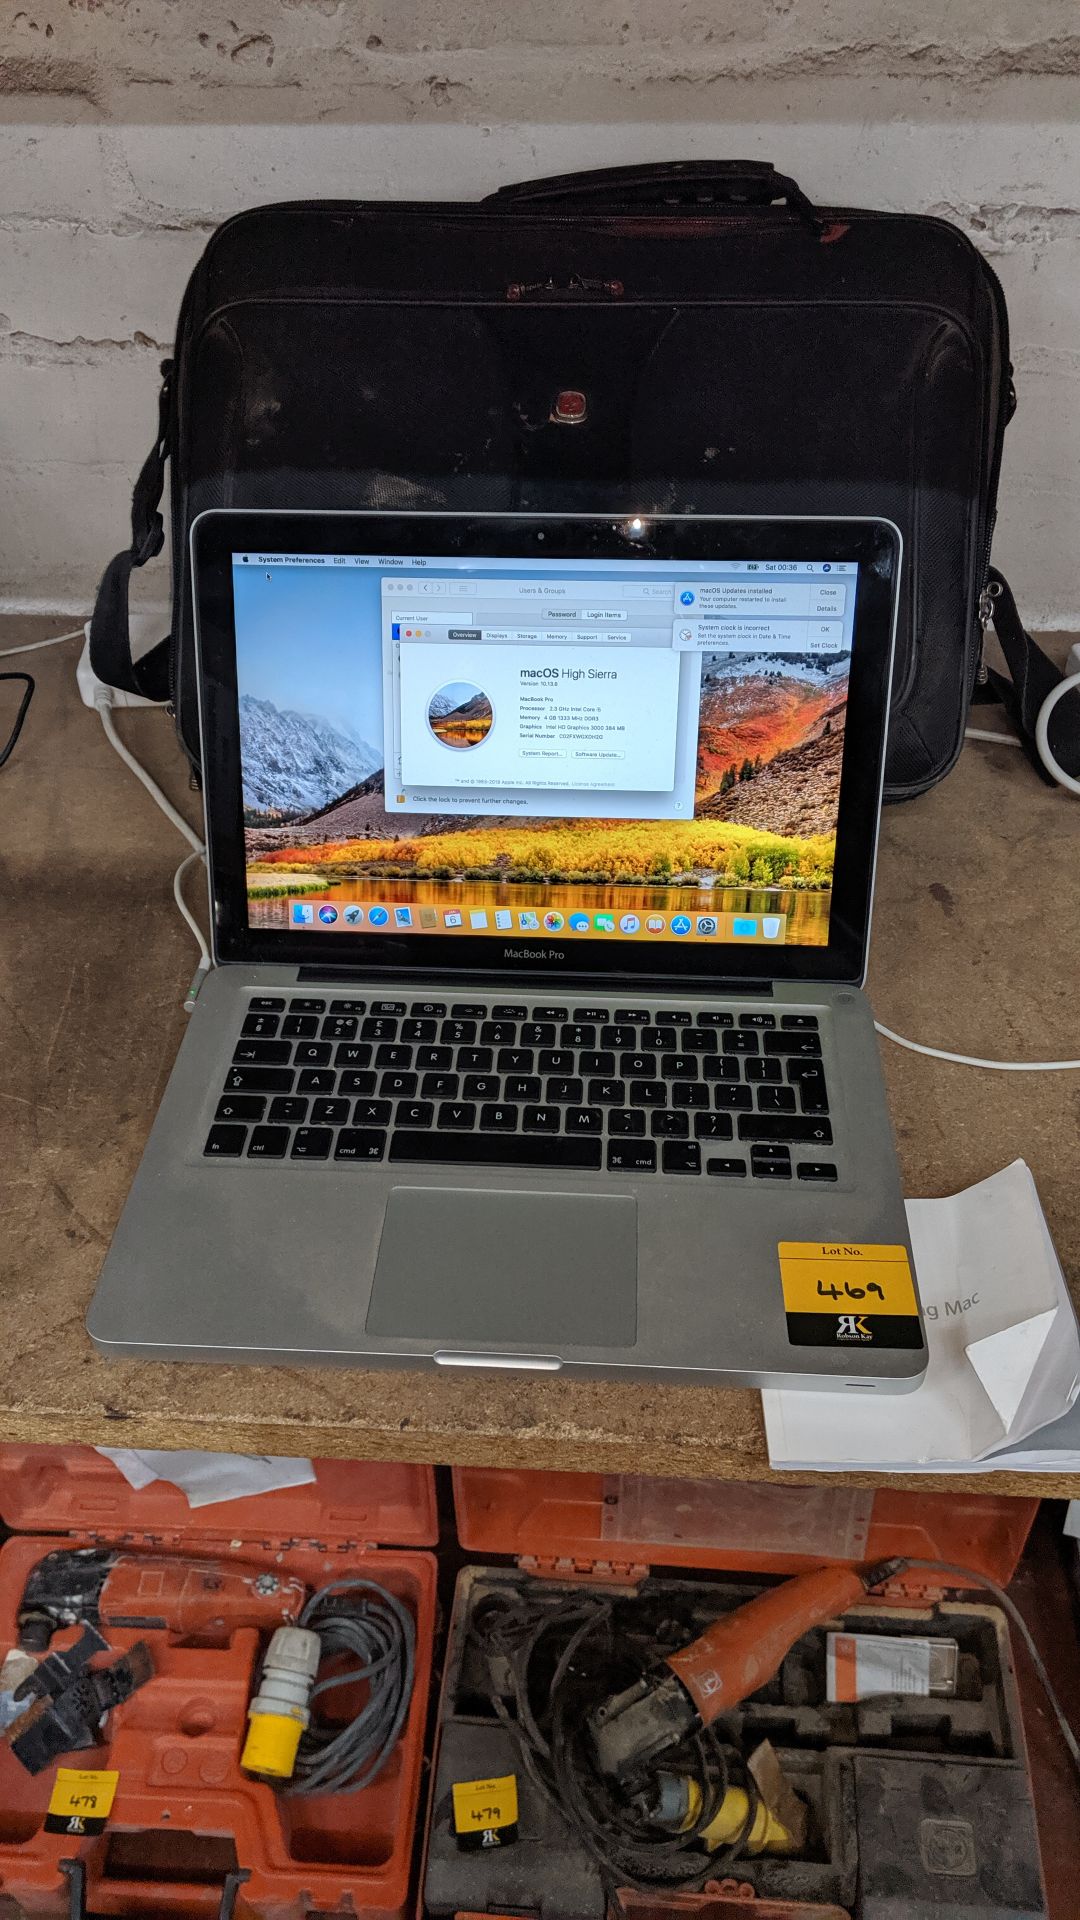 Apple MacBook Pro notebook computer with 2.3GHzIntel Core i5, 4 GB Ram, 320GB HDD